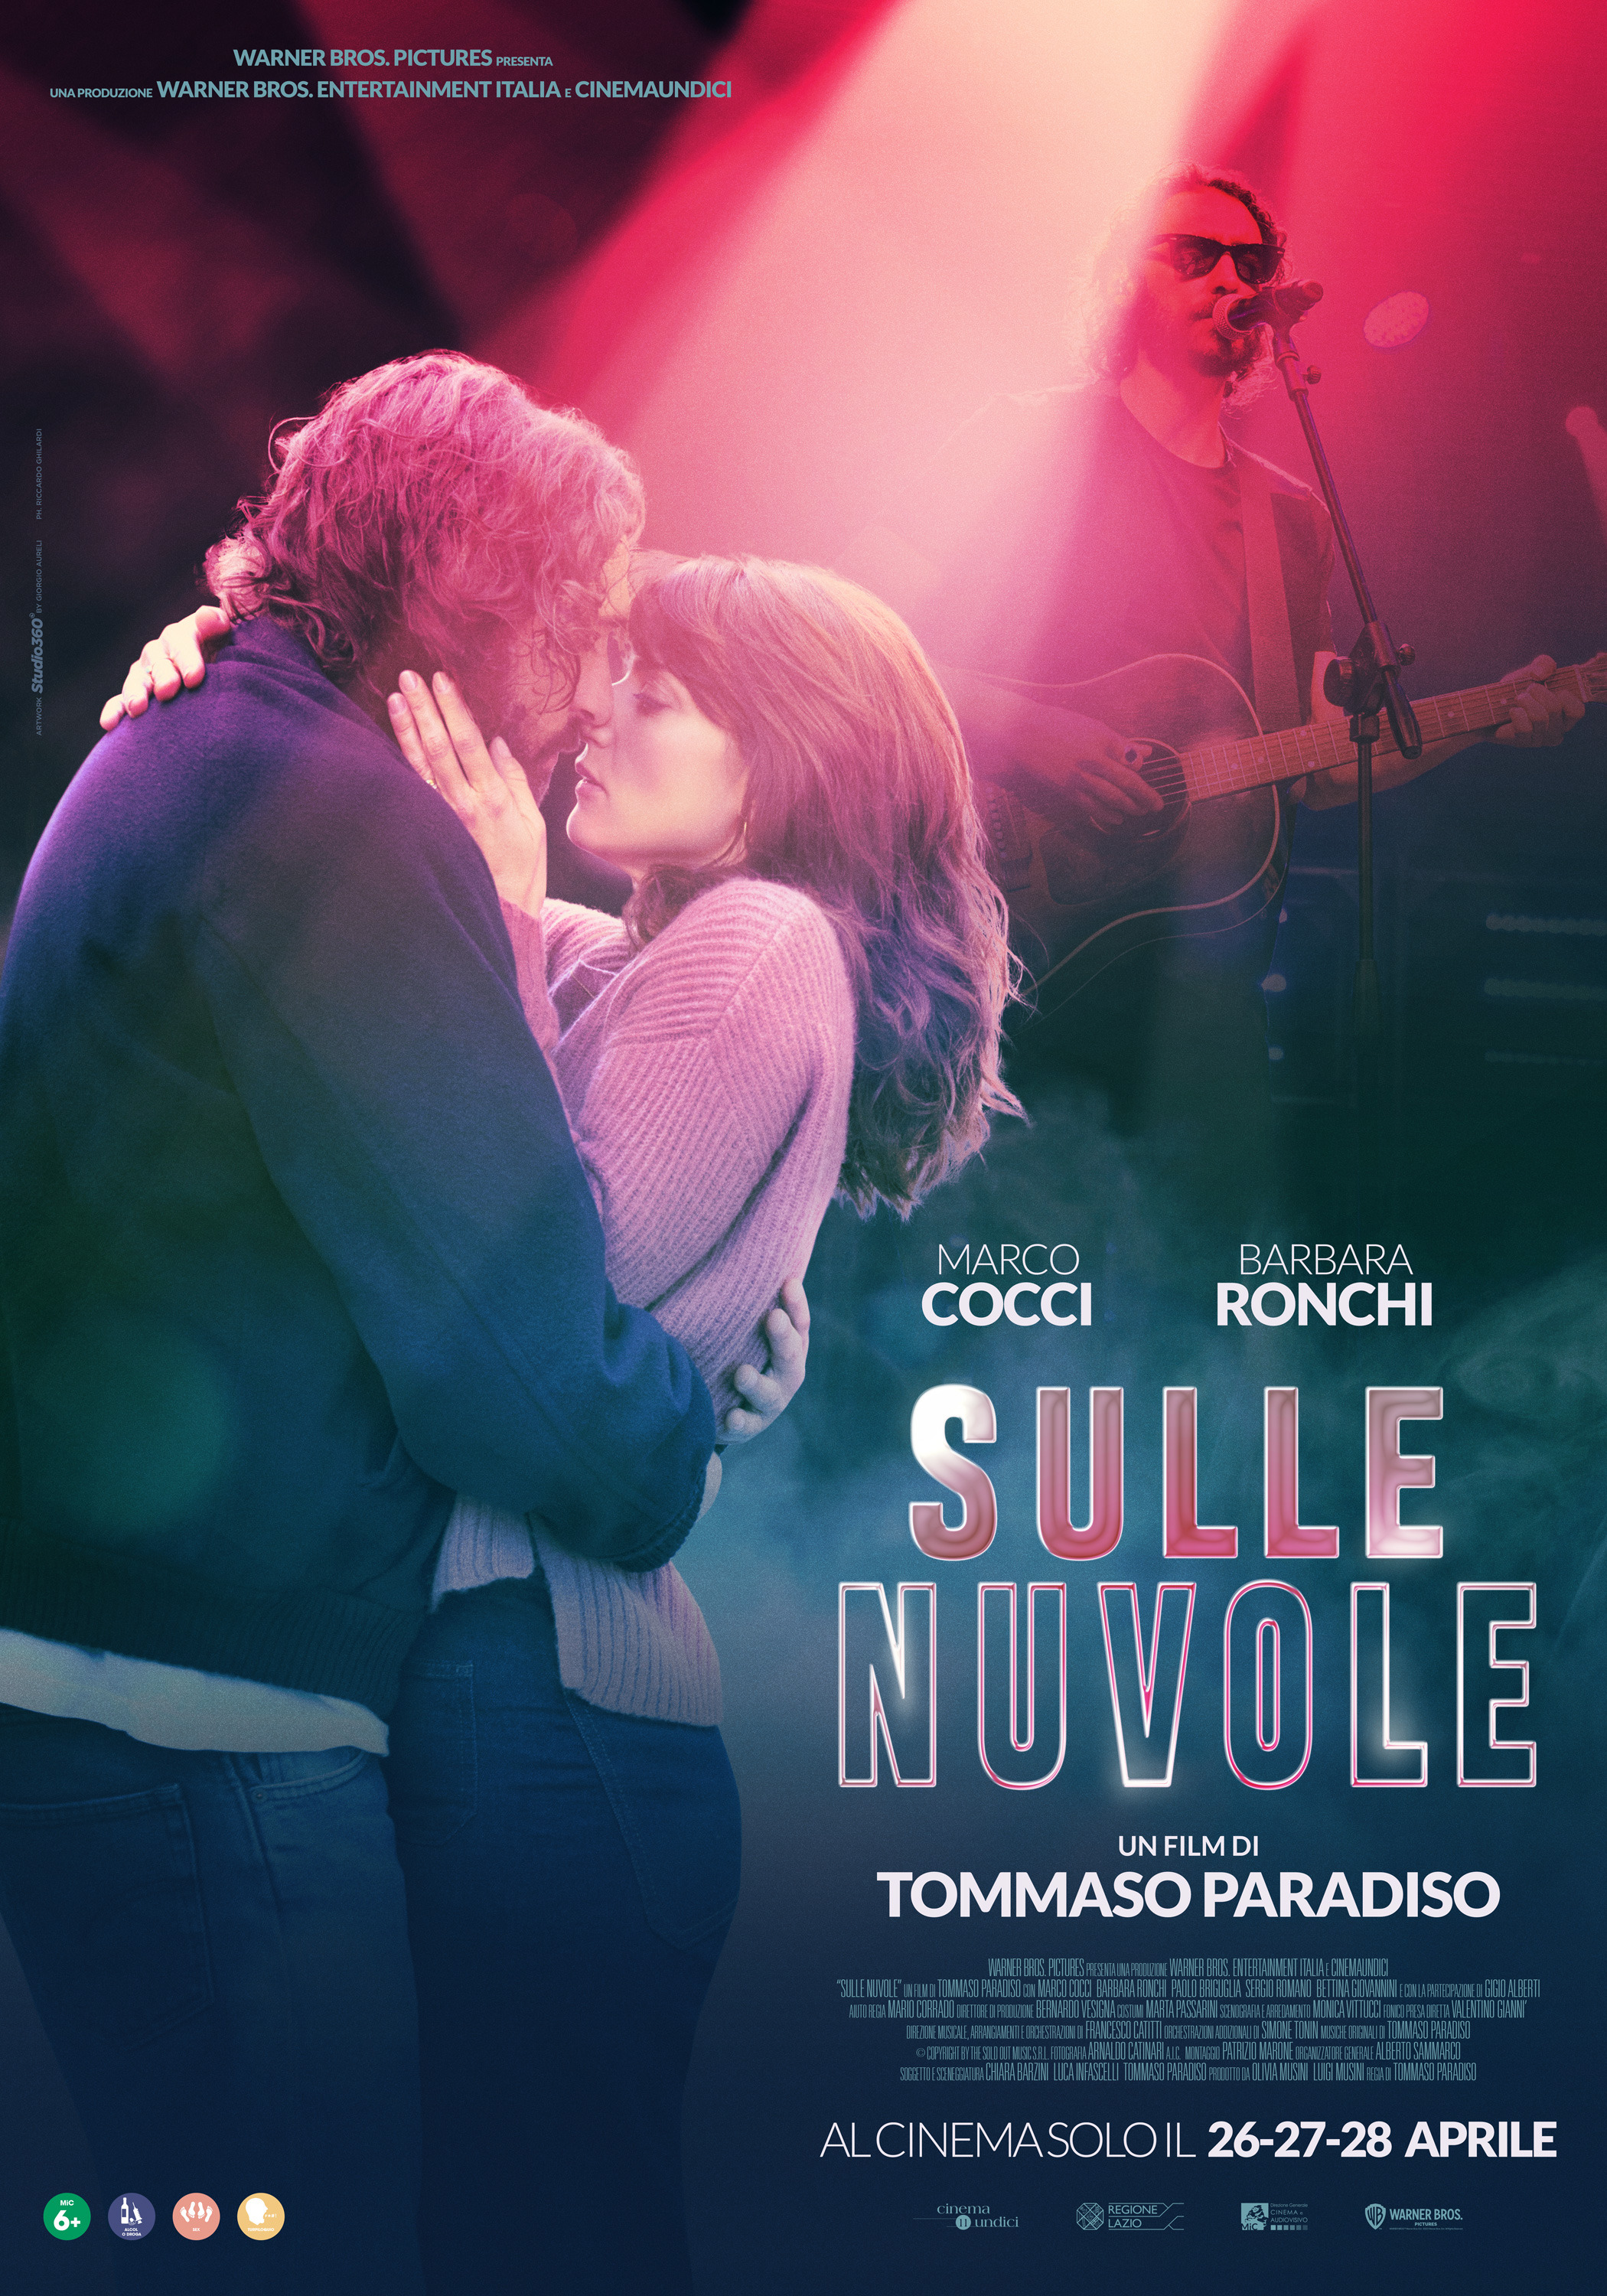 Mega Sized Movie Poster Image for Sulle nuvole 